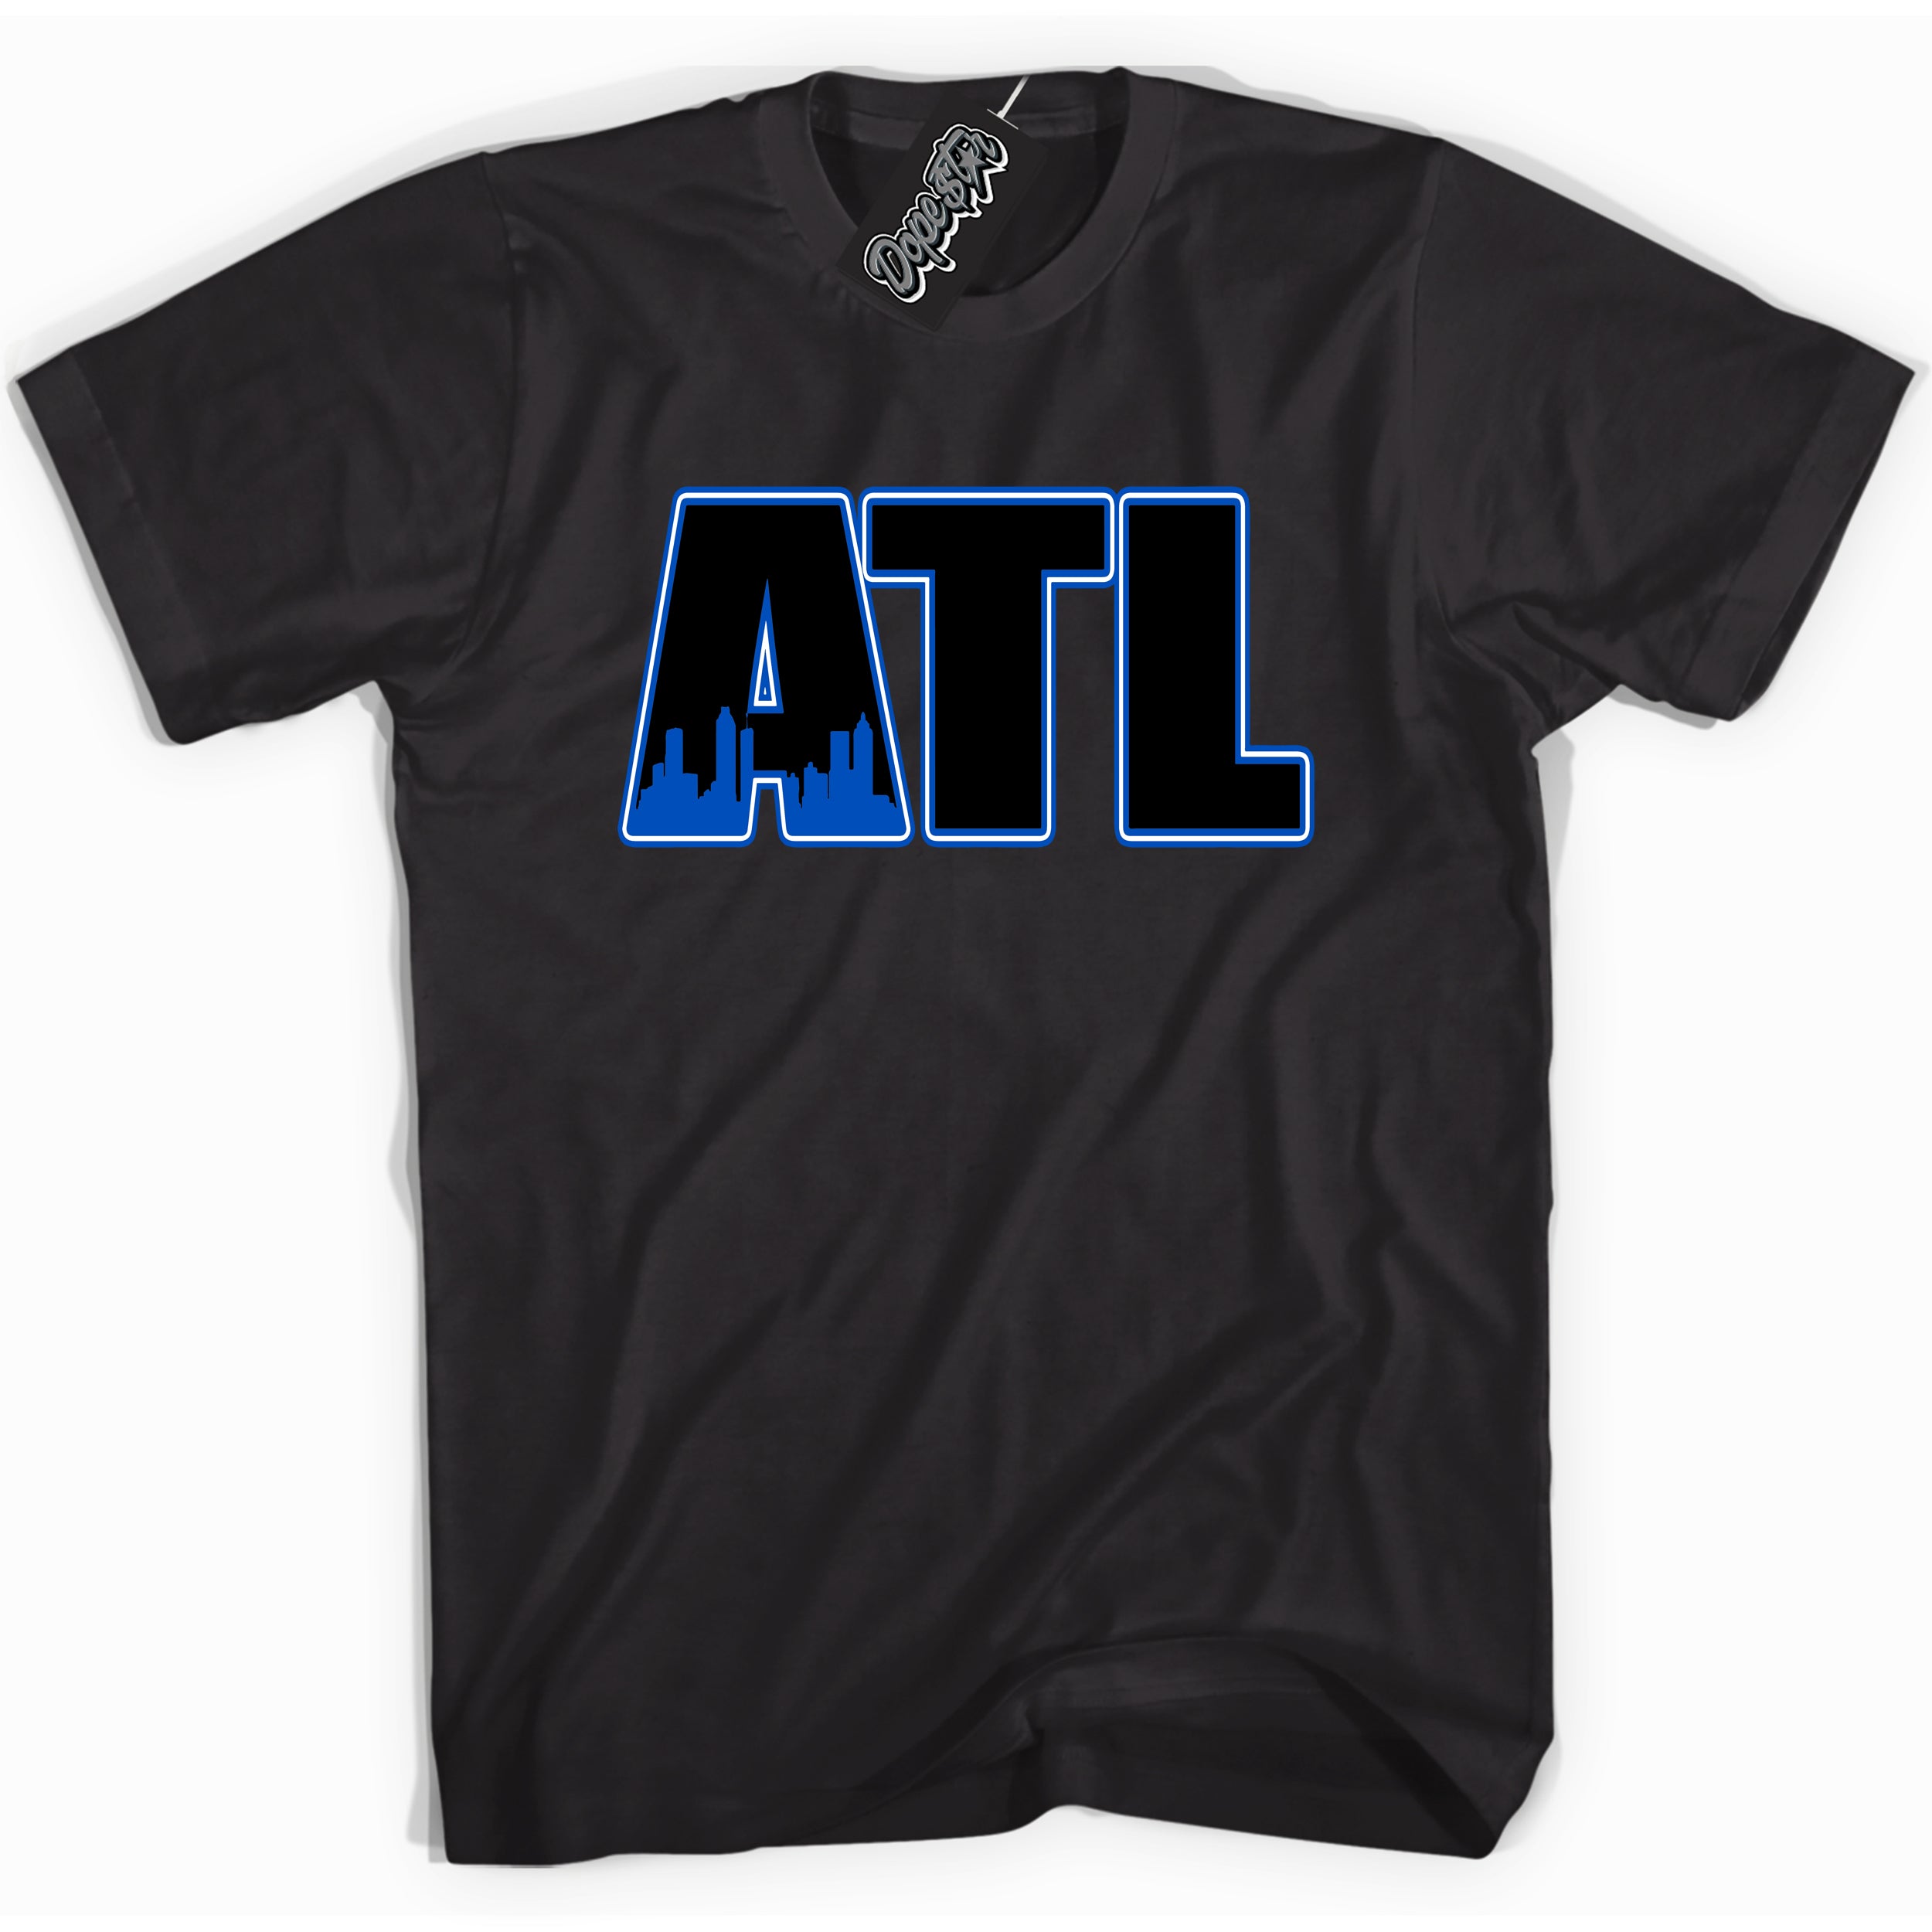 Cool Black graphic tee with "Atlanta" design, that perfectly matches Royal Reimagined 1s sneakers 